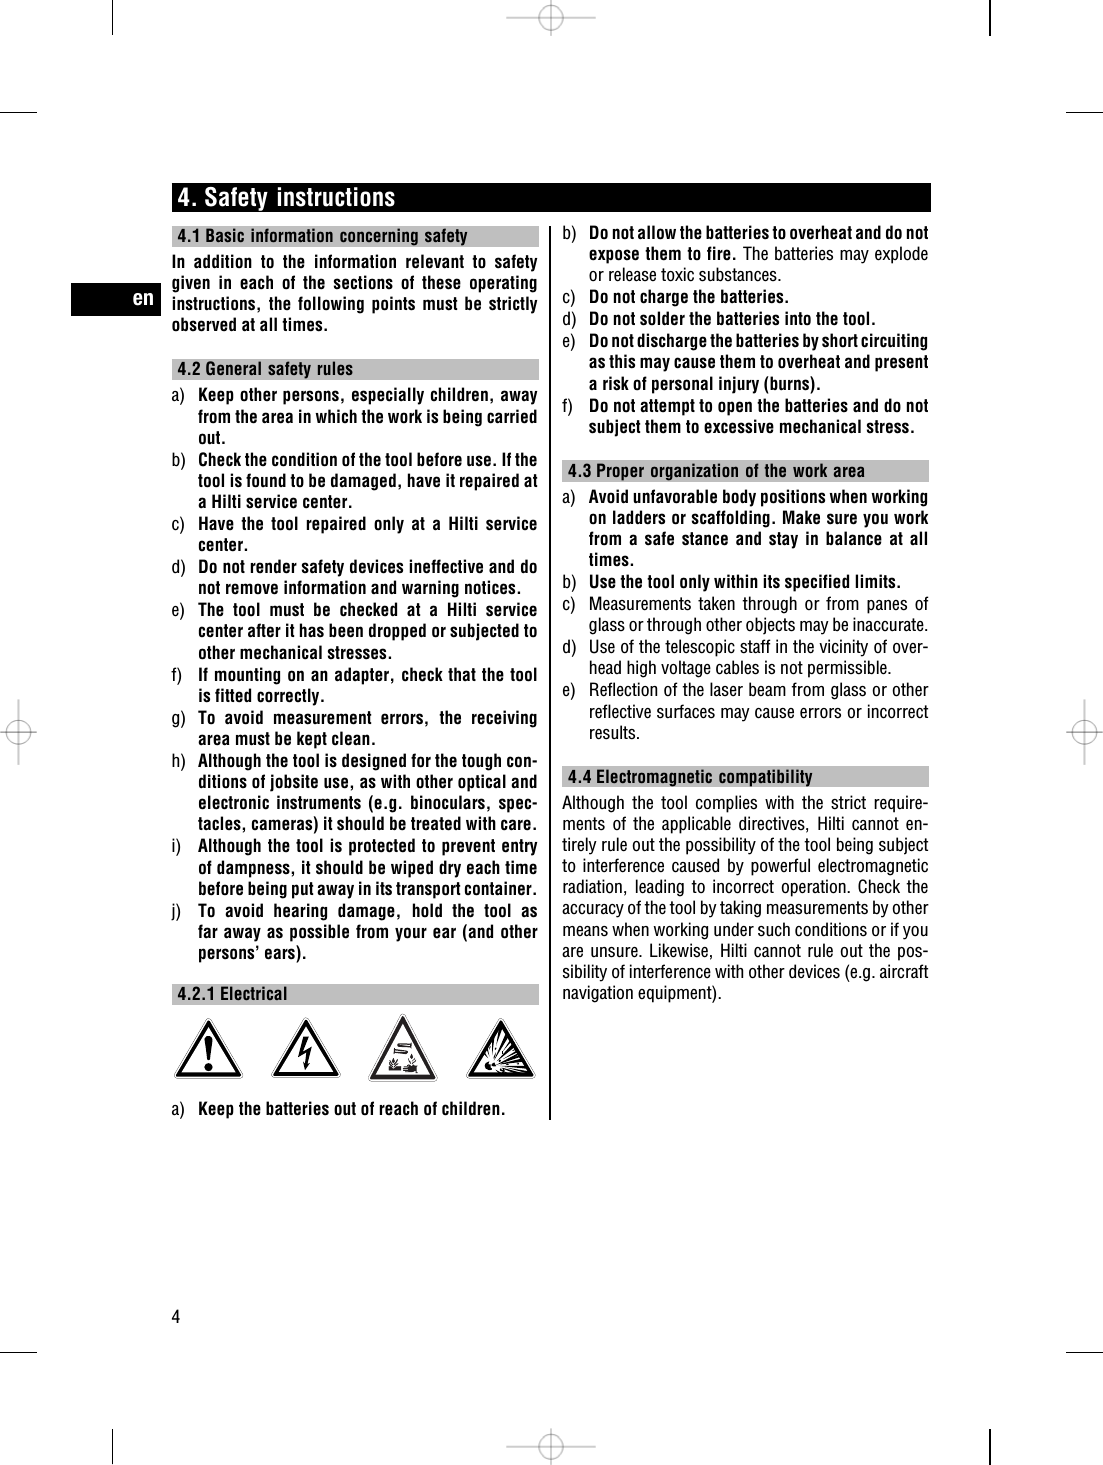 4. Safety instructions4.1 Basic information concerning safetyIn addition to the information relevant to safetygiven in each of the sections of these operatinginstructions, the following points must be strictlyobserved at all times.4.2 General safety rulesa) Keep other persons, especially children, awayfrom the area in which the work is being carriedout.b) Check the condition of the tool before use. If thetool is found to be damaged, have it repaired ata Hilti service center.c) Have the tool repaired only at a Hilti servicecenter.d) Do not render safety devices ineffective and donot remove information and warning notices.e) The tool must be checked at a Hilti servicecenter after it has been dropped or subjected toother mechanical stresses.f) If mounting on an adapter, check that the toolis fitted correctly.g) To avoid measurement errors, the receivingarea must be kept clean.h) Although the tool is designed for the tough con-ditions of jobsite use, as with other optical andelectronic instruments (e.g. binoculars, spec-tacles, cameras) it should be treated with care.i) Although the tool is protected to prevent entryof dampness, it should be wiped dry each timebefore being put away in its transport container.j) To avoid hearing damage, hold the tool asfar away as possible from your ear (and otherpersons’ ears).4.2.1 Electricala) Keep the batteries out of reach of children.b) Do not allow the batteries to overheat and do notexpose them to fire. The batteries may explodeor release toxic substances.c) Do not charge the batteries.d) Do not solder the batteries into the tool.e) Do not discharge the batteries by short circuitingas this may cause them to overheat and presenta risk of personal injury (burns).f) Do not attempt to open the batteries and do notsubject them to excessive mechanical stress.4.3 Proper organization of the work areaa) Avoid unfavorable body positions when workingon ladders or scaffolding. Make sure you workfrom a safe stance and stay in balance at alltimes.b) Use the tool only within its specified limits.c) Measurements taken through or from panes ofglass or through other objects may be inaccurate.d) Use of the telescopic staff in the vicinity of over-head high voltage cables is not permissible.e) Reflection of the laser beam from glass or otherreflective surfaces may cause errors or incorrectresults.4.4 Electromagnetic compatibilityAlthough the tool complies with the strict require-ments of the applicable directives, Hilti cannot en-tirely rule out the possibility of the tool being subjectto interference caused by powerful electromagneticradiation, leading to incorrect operation. Check theaccuracy of the tool by taking measurements by othermeans when working under such conditions or if youare unsure. Likewise, Hilti cannot rule out the pos-sibility of interference with other devices (e.g. aircraftnavigation equipment).en4